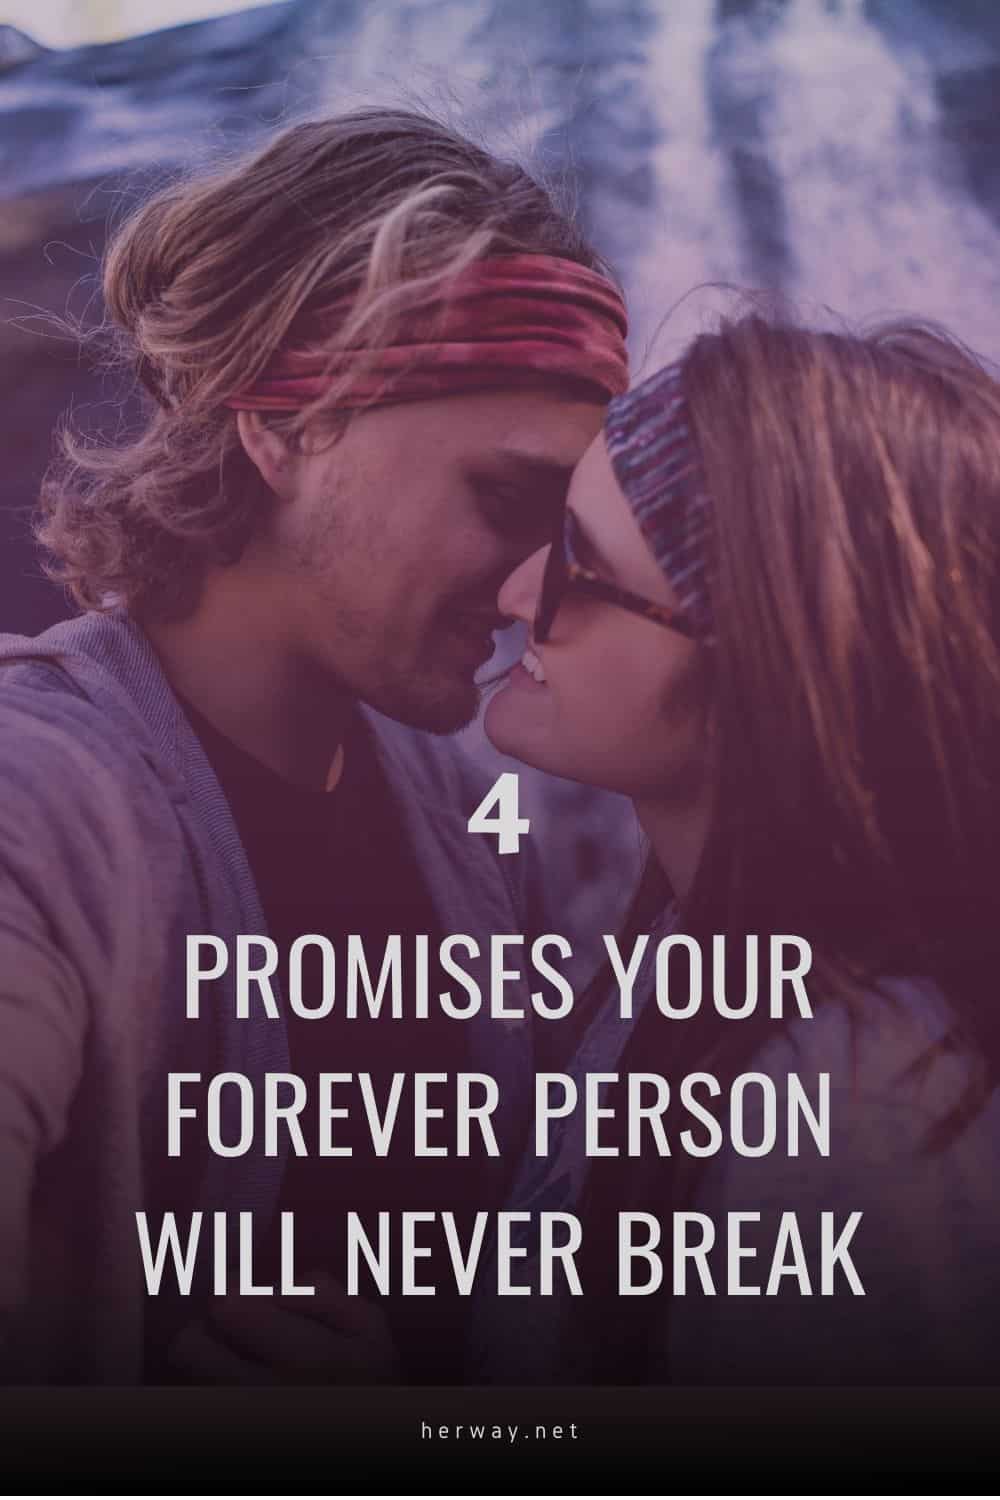 4 Promises Your Forever Person Will Never Break